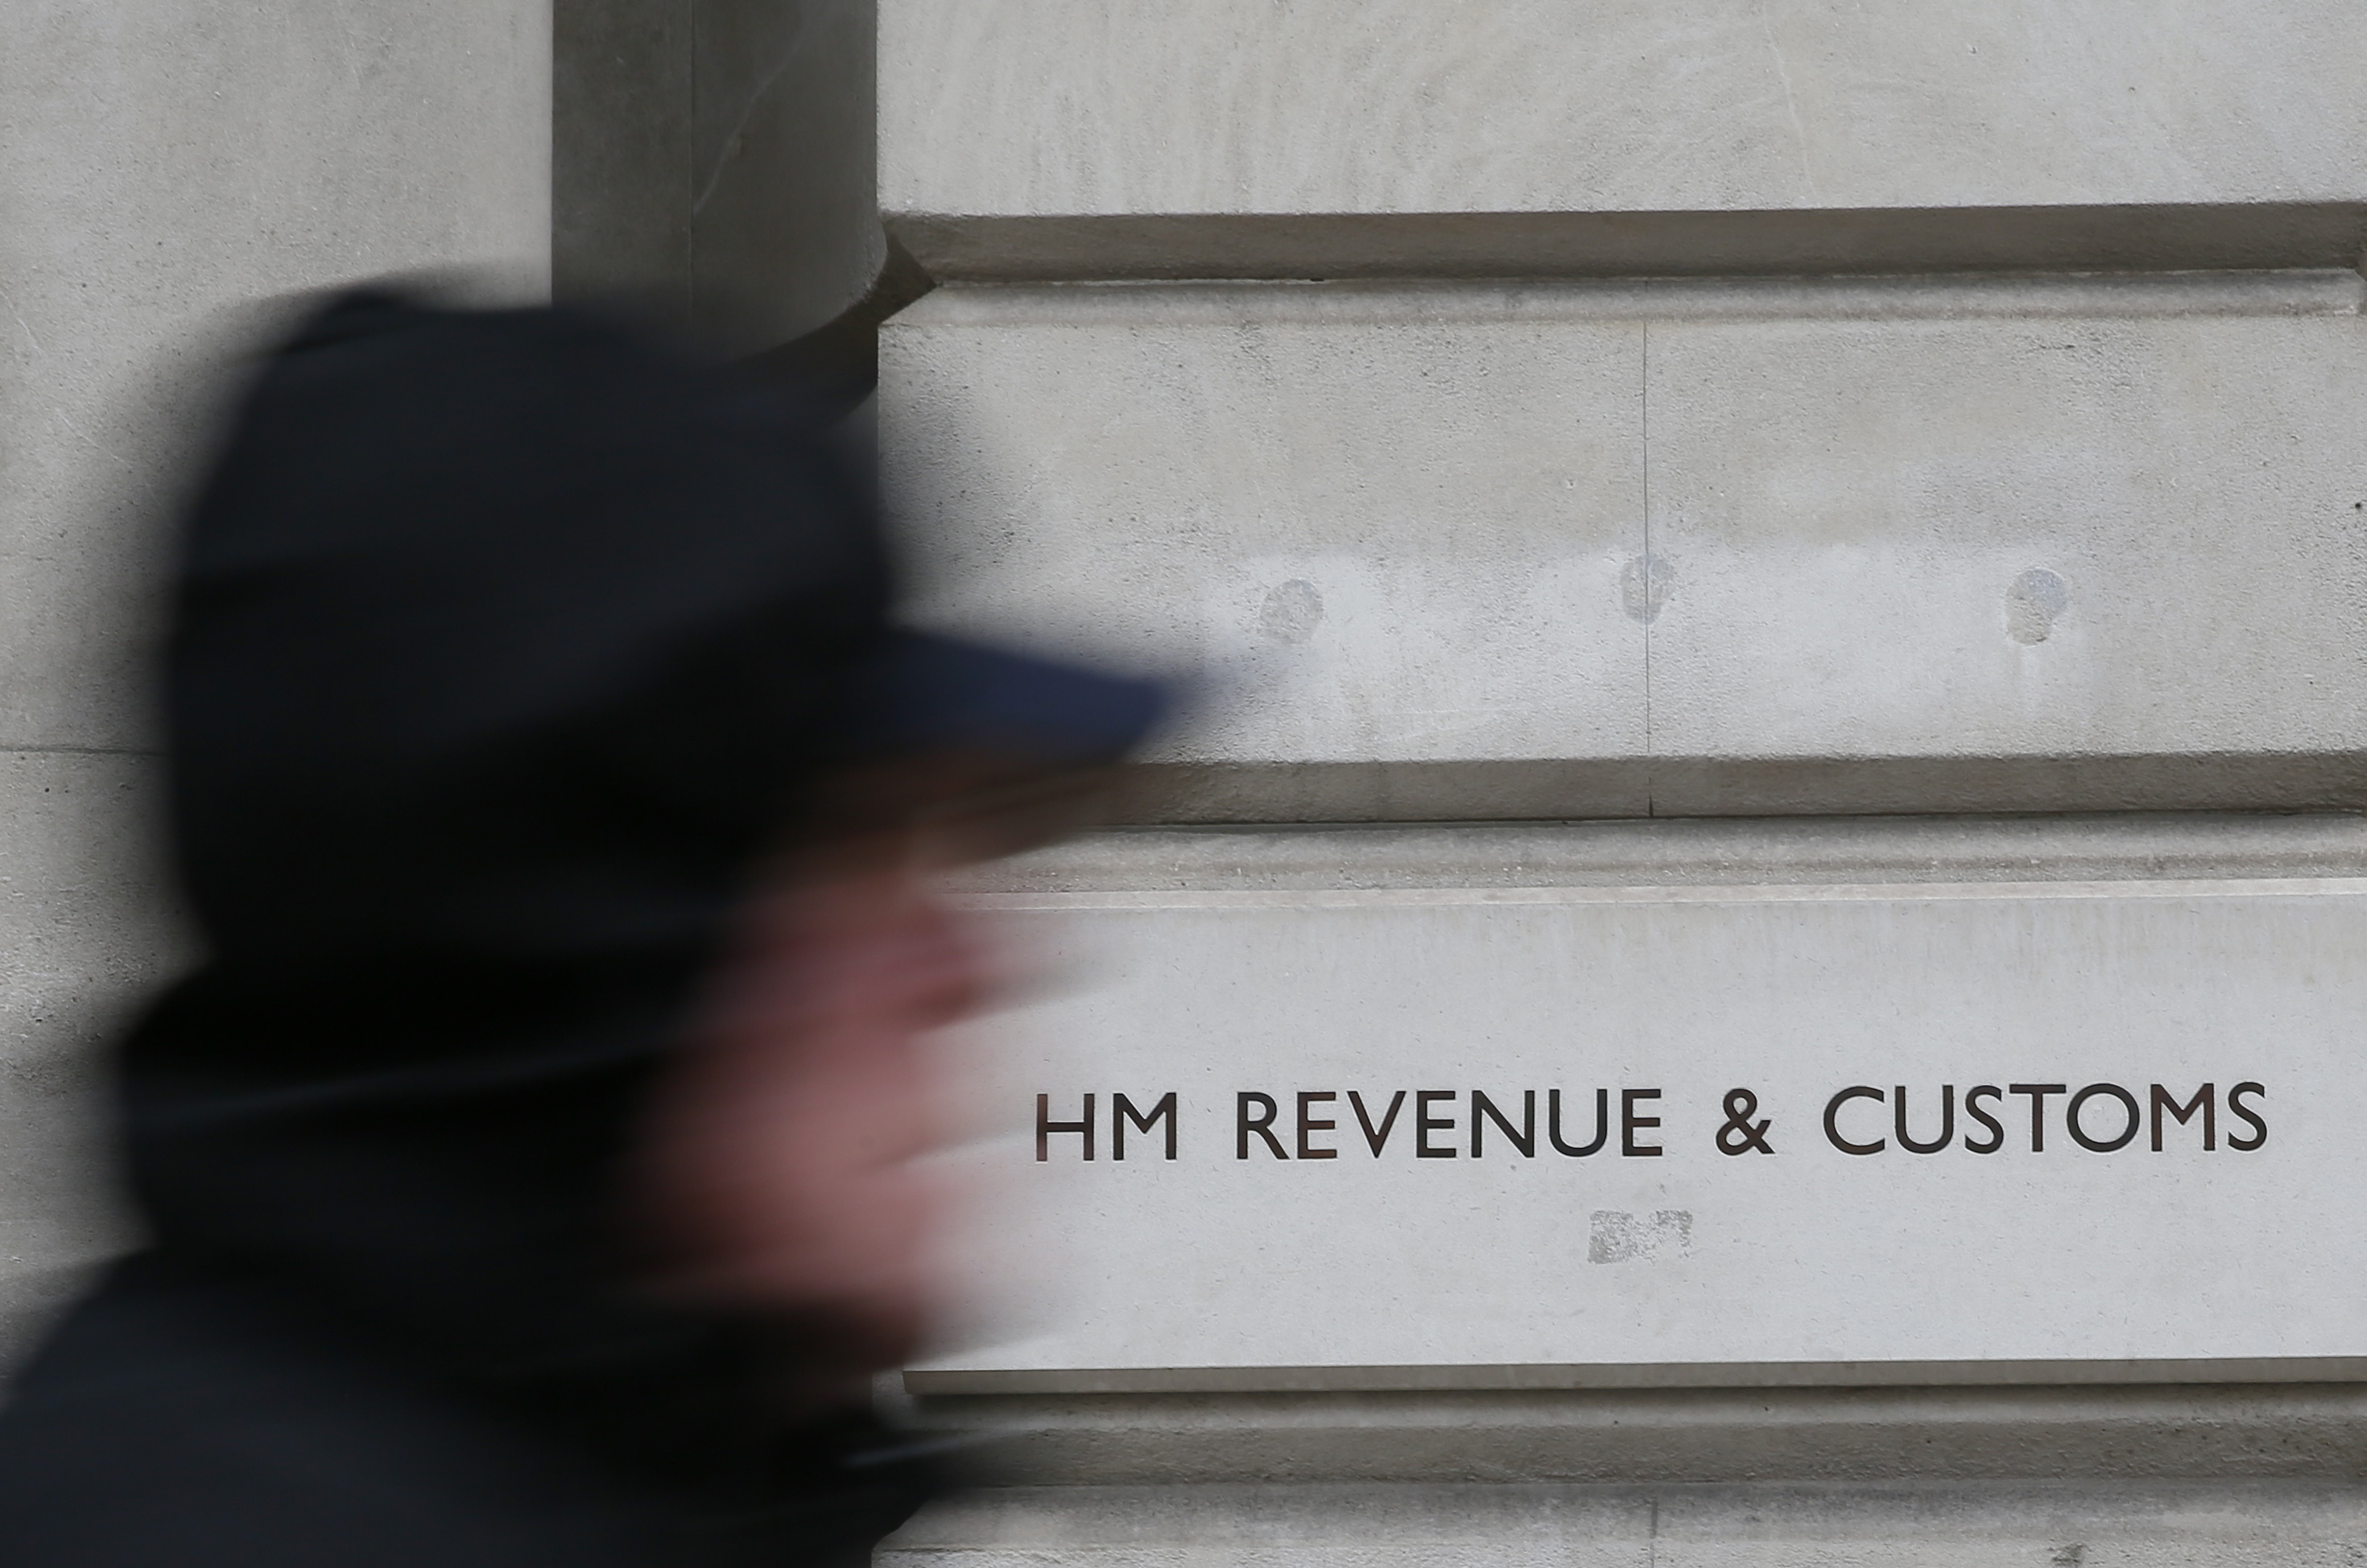 A pedestrian walks past the headquarters of Her Majesty's Revenue and Customs (HMRC) in central London